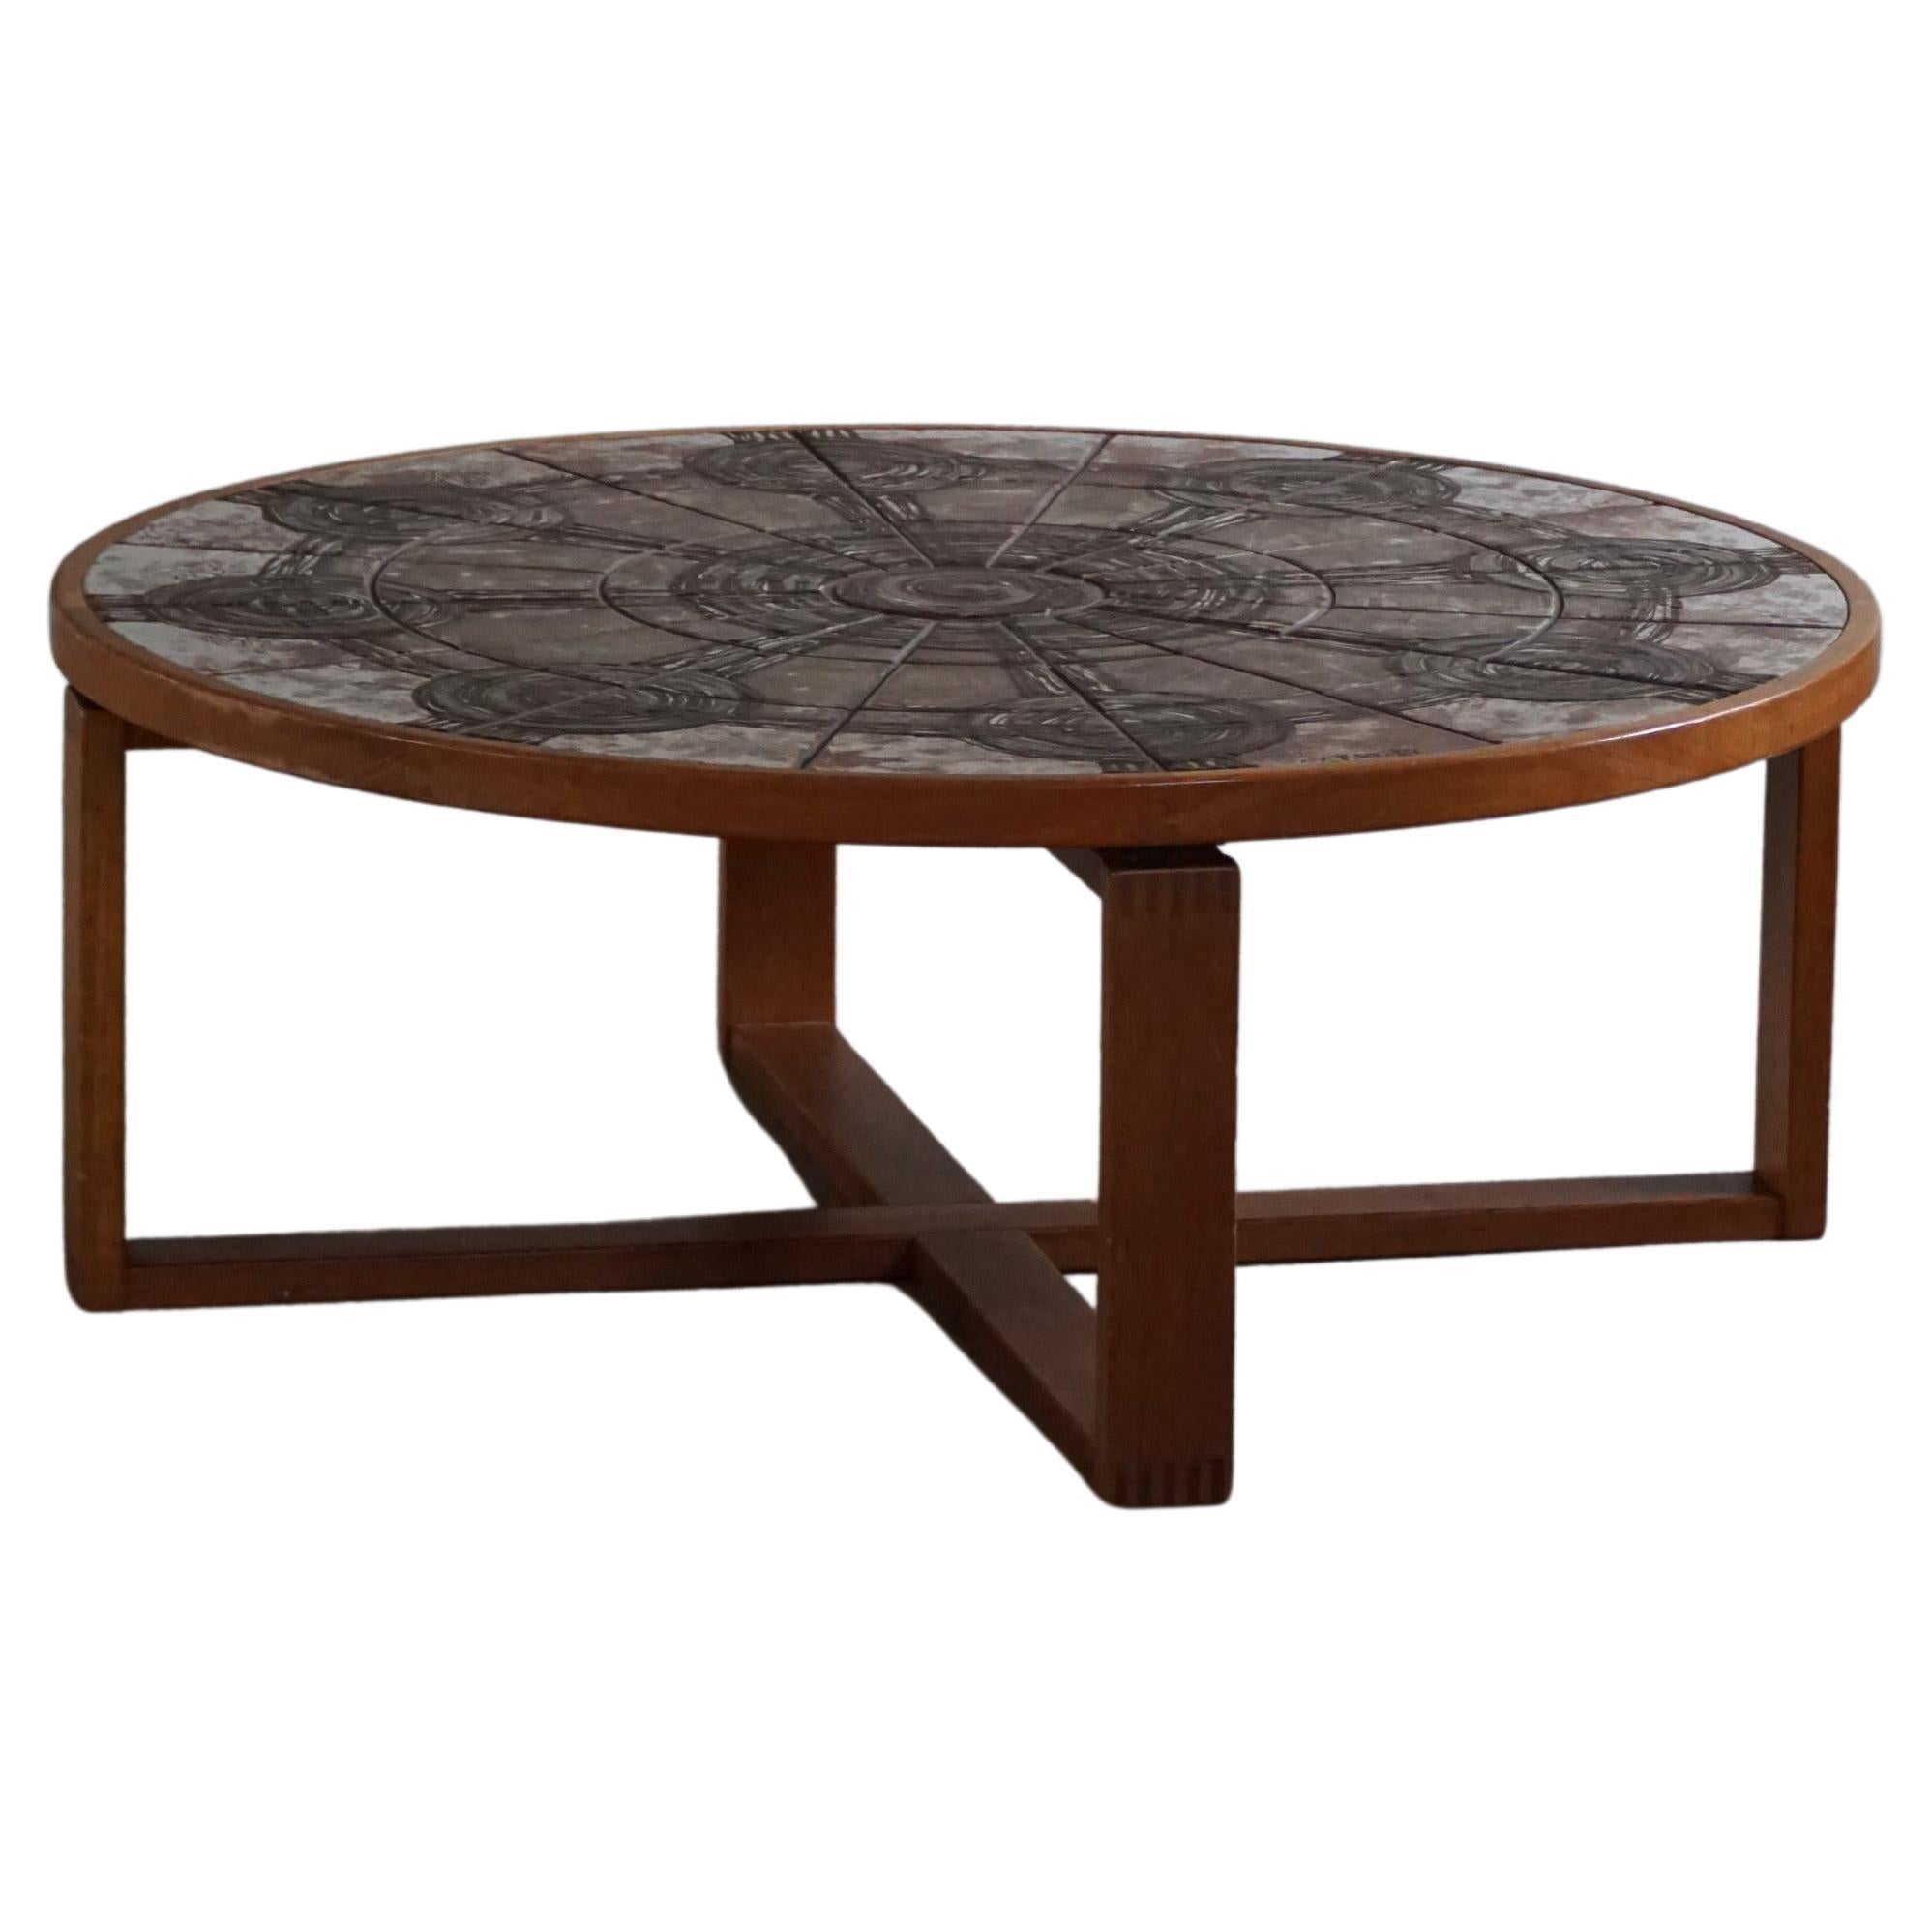 Round Coffee Table in Teak & Ceramic Tiles, Ox Art by Trioh, 1970s in Denmark For Sale